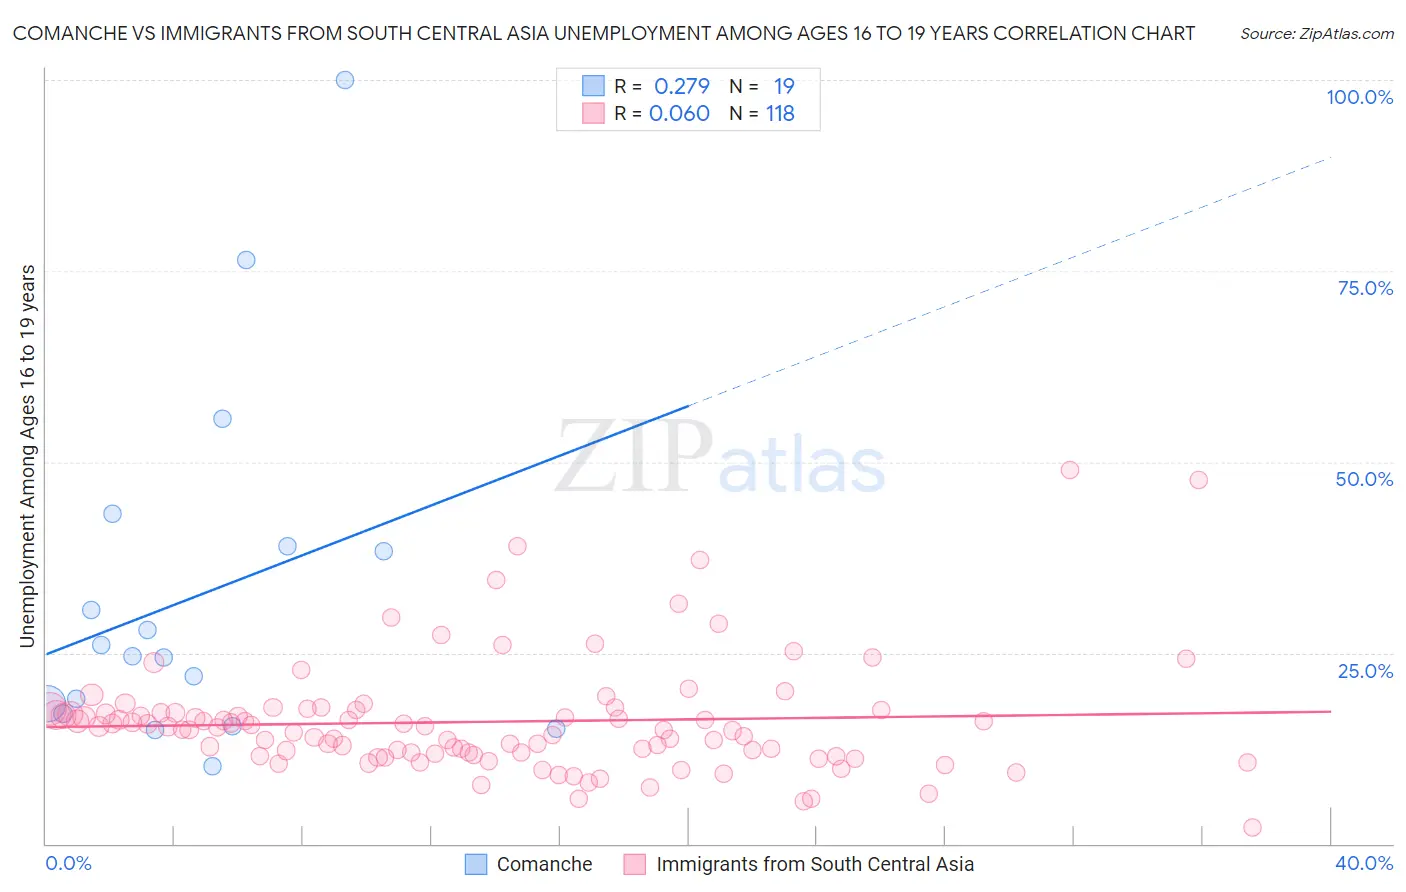 Comanche vs Immigrants from South Central Asia Unemployment Among Ages 16 to 19 years